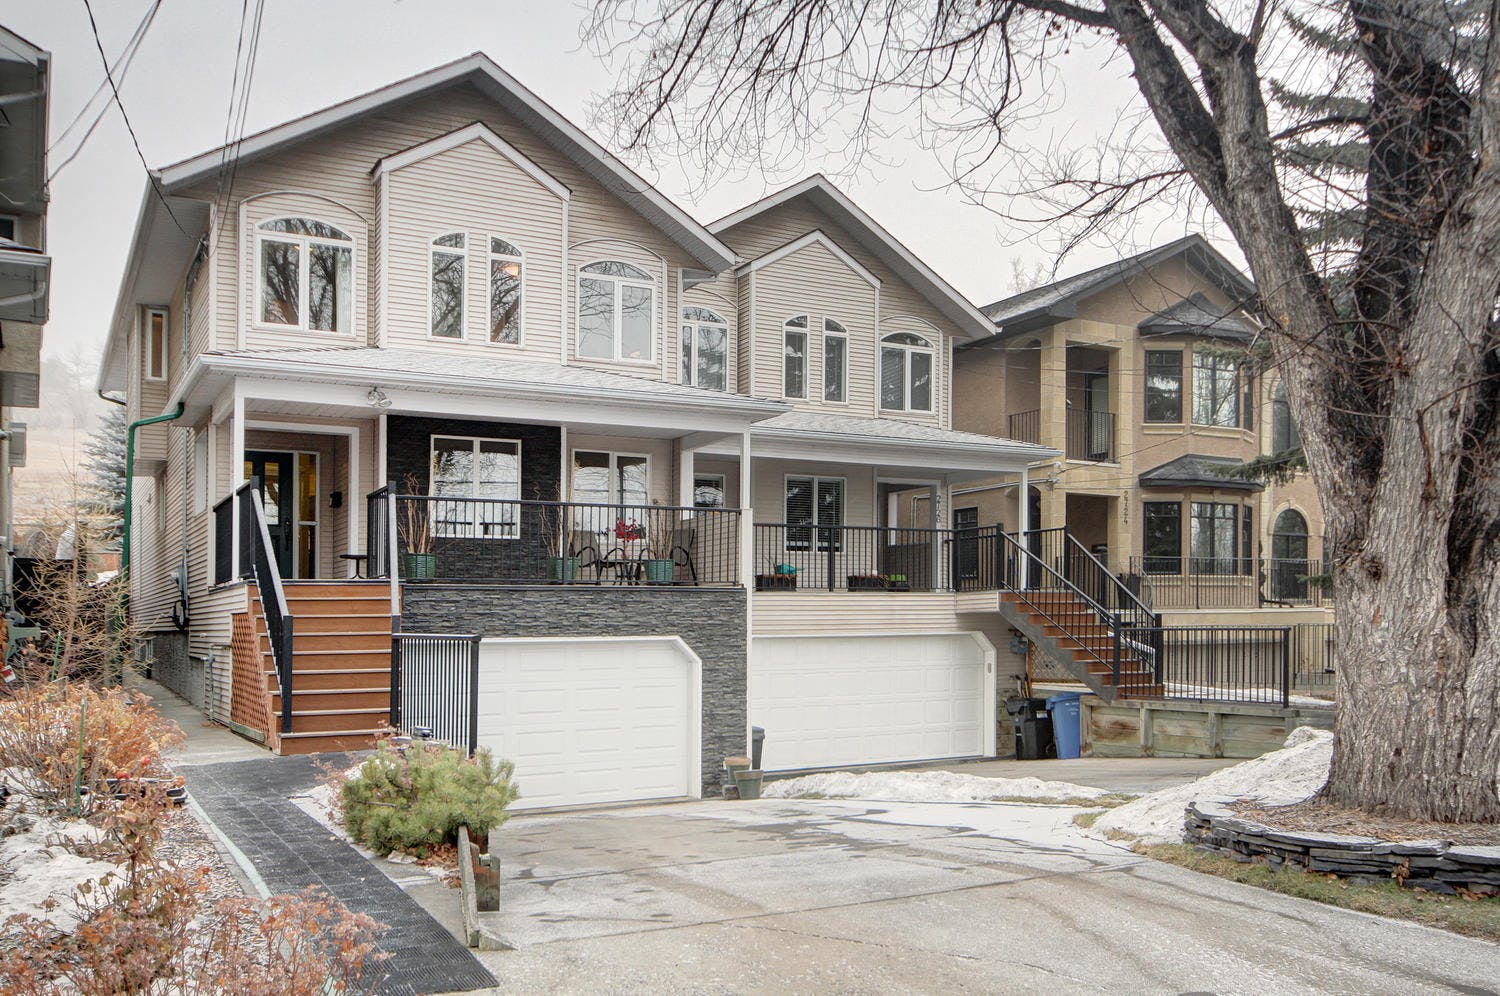 2728 7 Ave NW Calgary AB T2N-large-001-6-2728 7th Ave NW-1500x997-72dpi